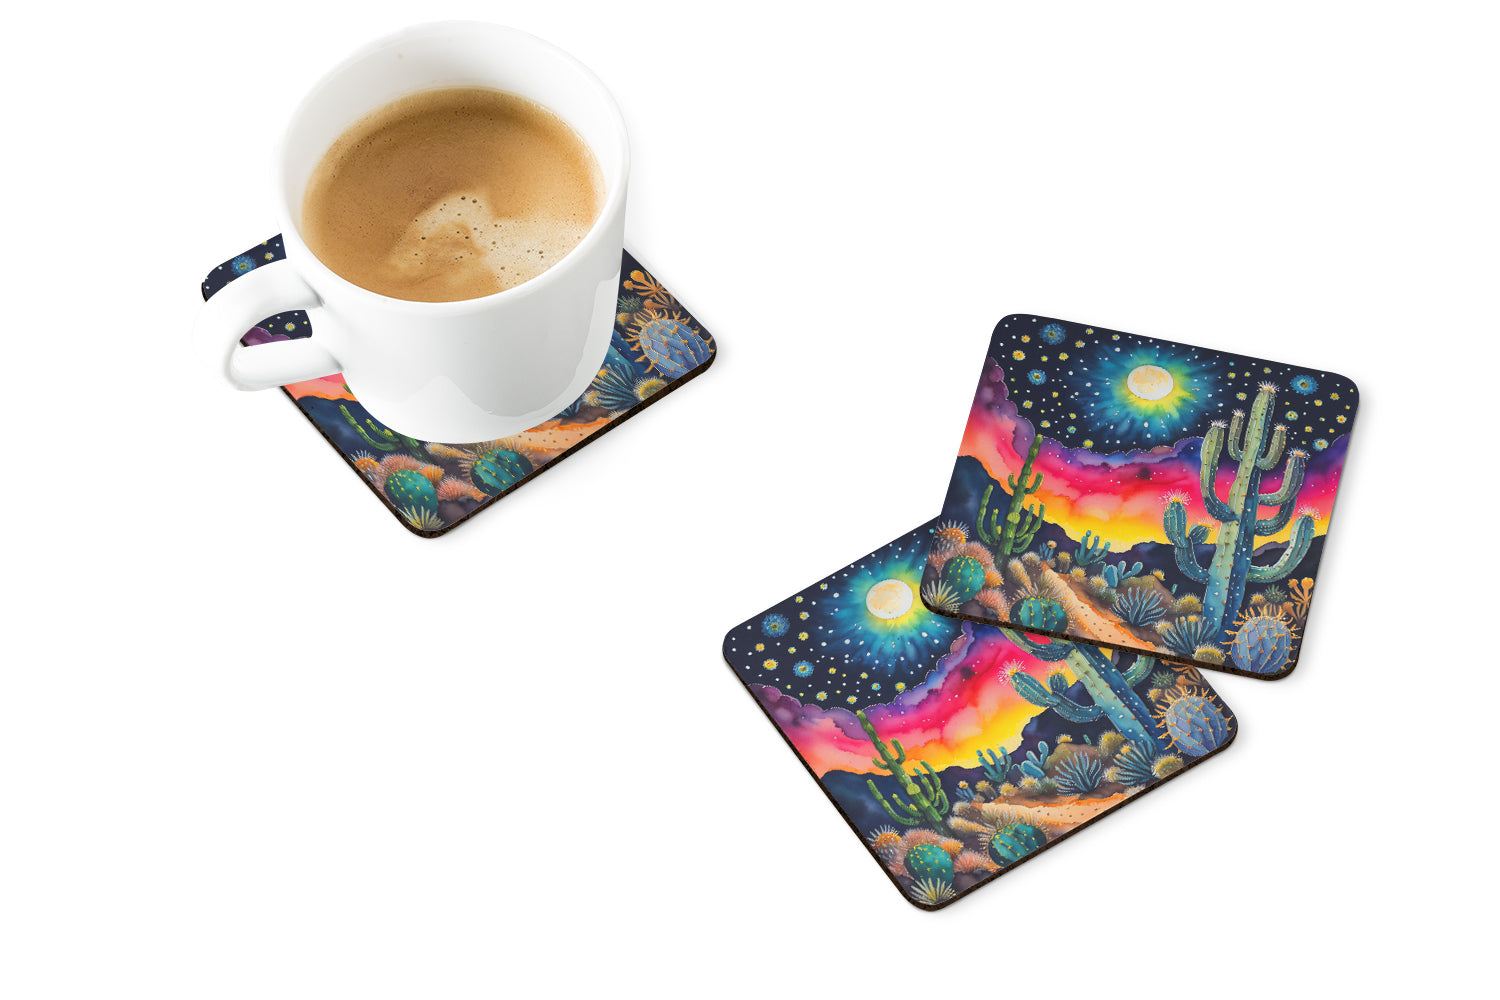 Colorful Queen of the Night Cactus Foam Coaster Set of 4